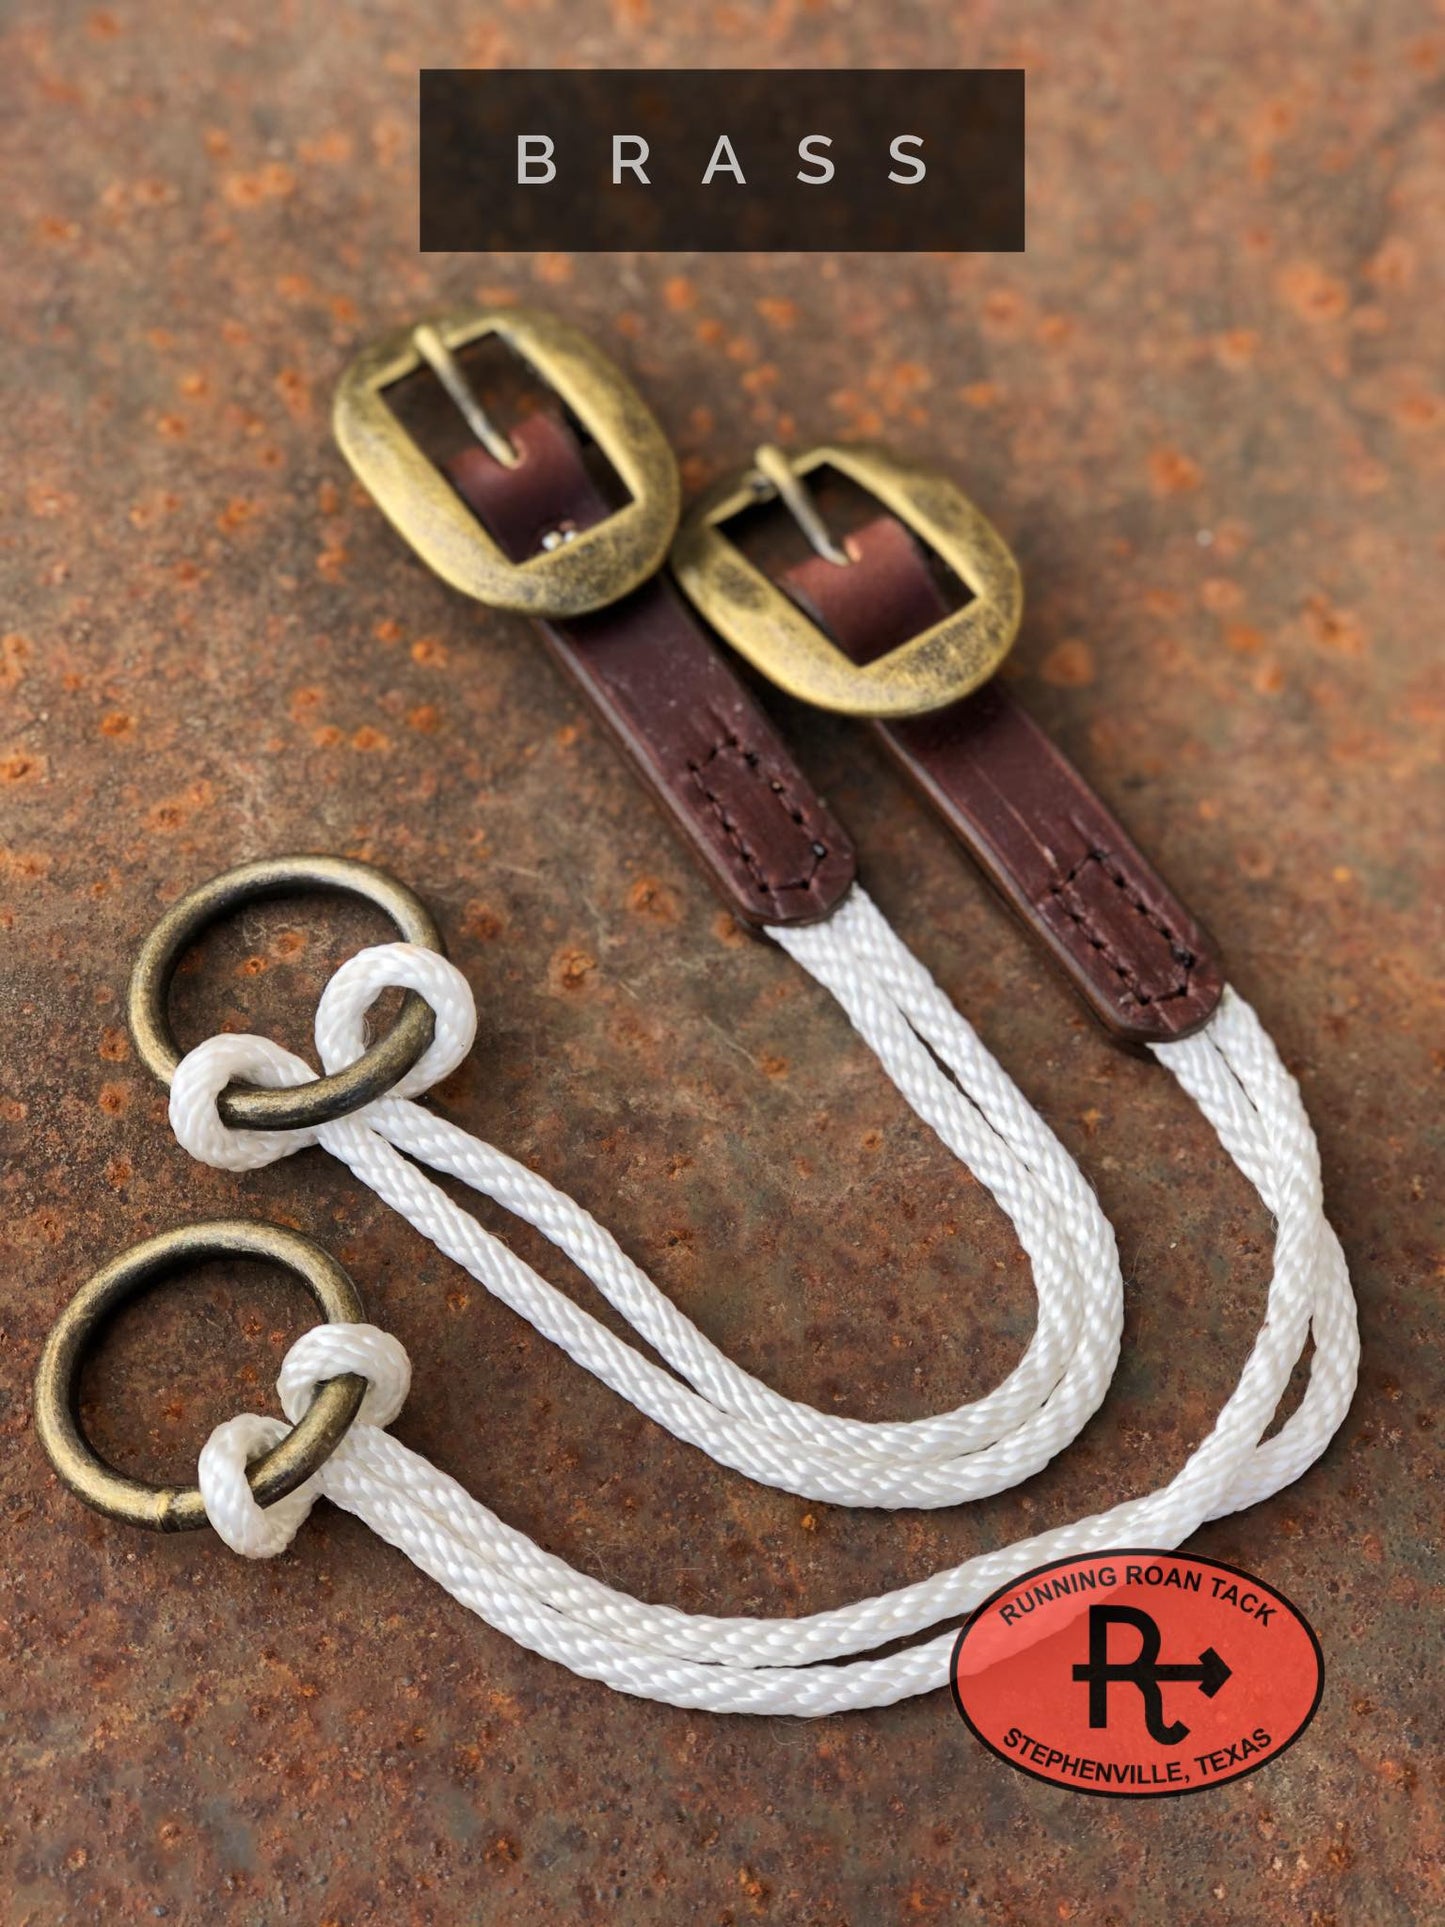 Pair of Draw Gag Cheeks with Your Choice of Buckle and Ring Color